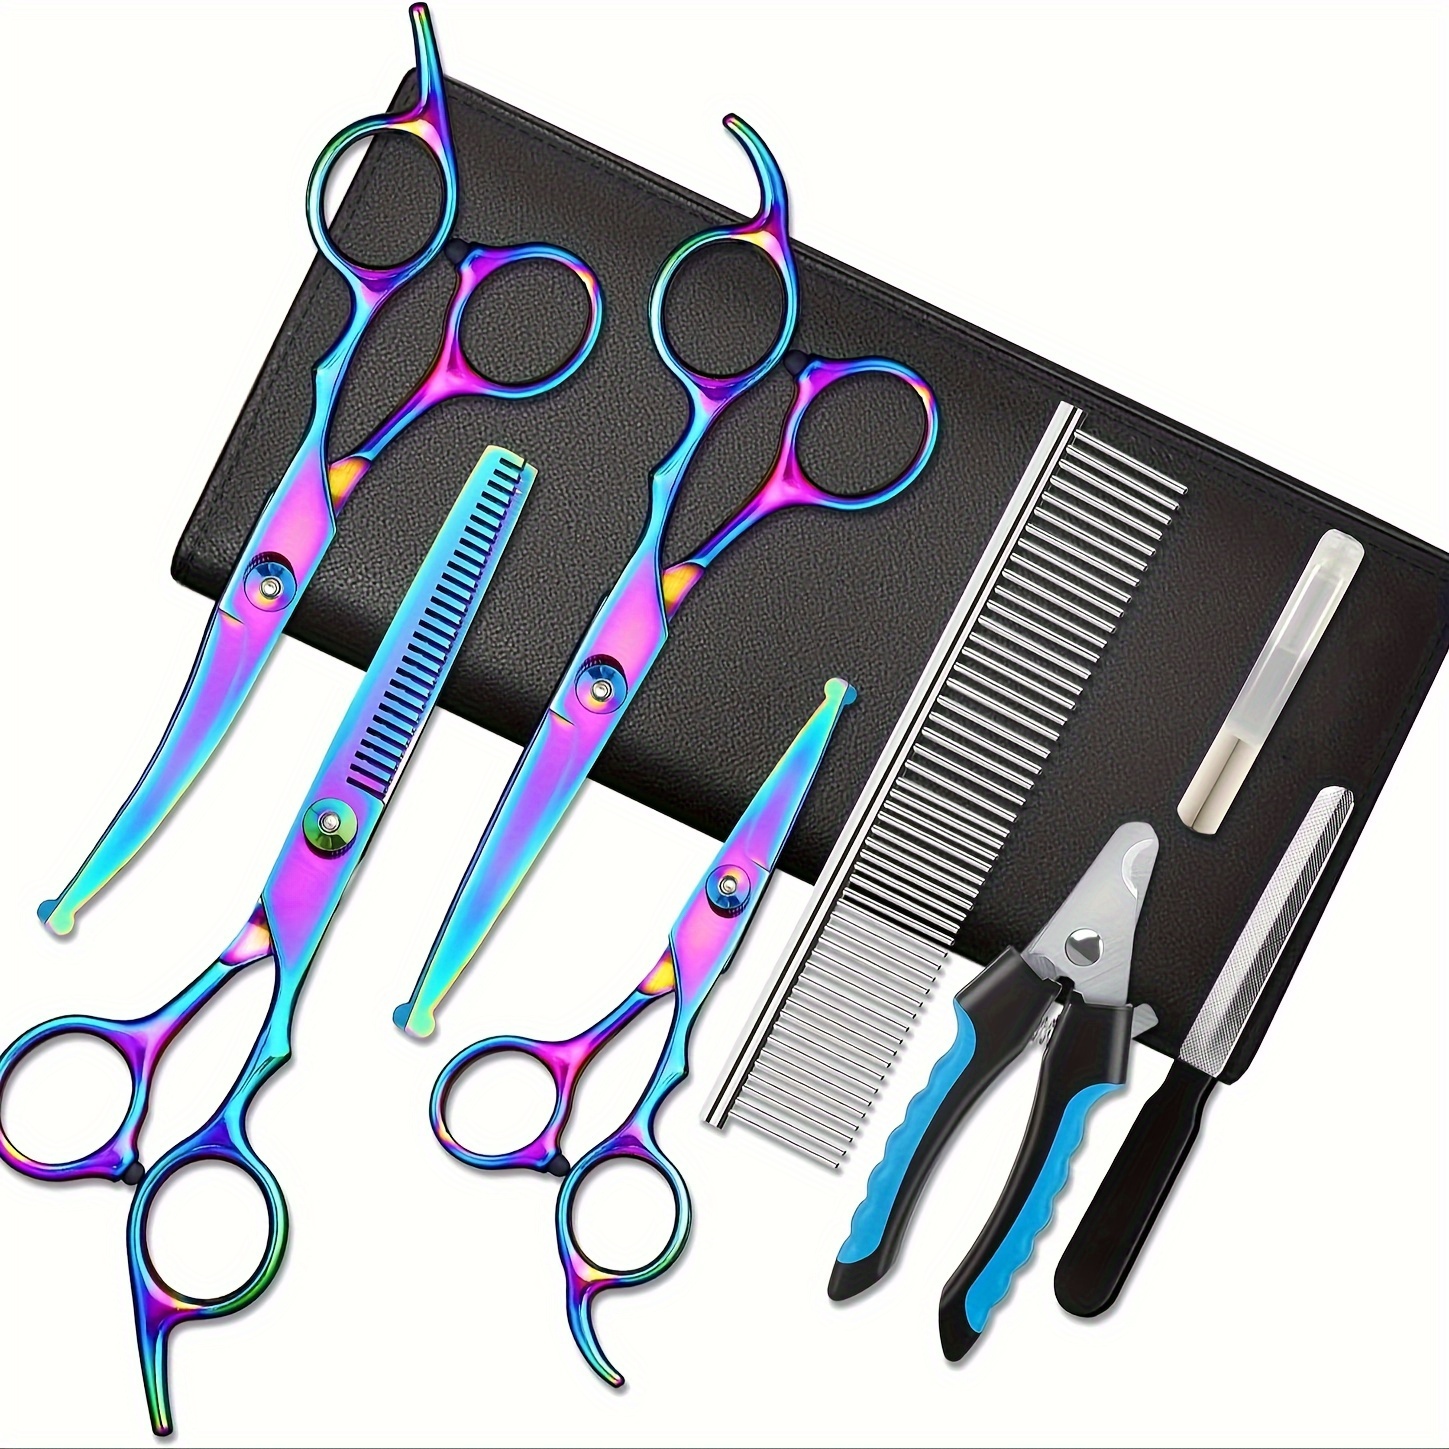 

Dog Grooming Scissors, 8 In 1 Professional Dog Grooming Scissors Kit With Safety Round Tip, Titanium Coated Grooming Scissors For Dogs Cats Pets (gradient Purple)